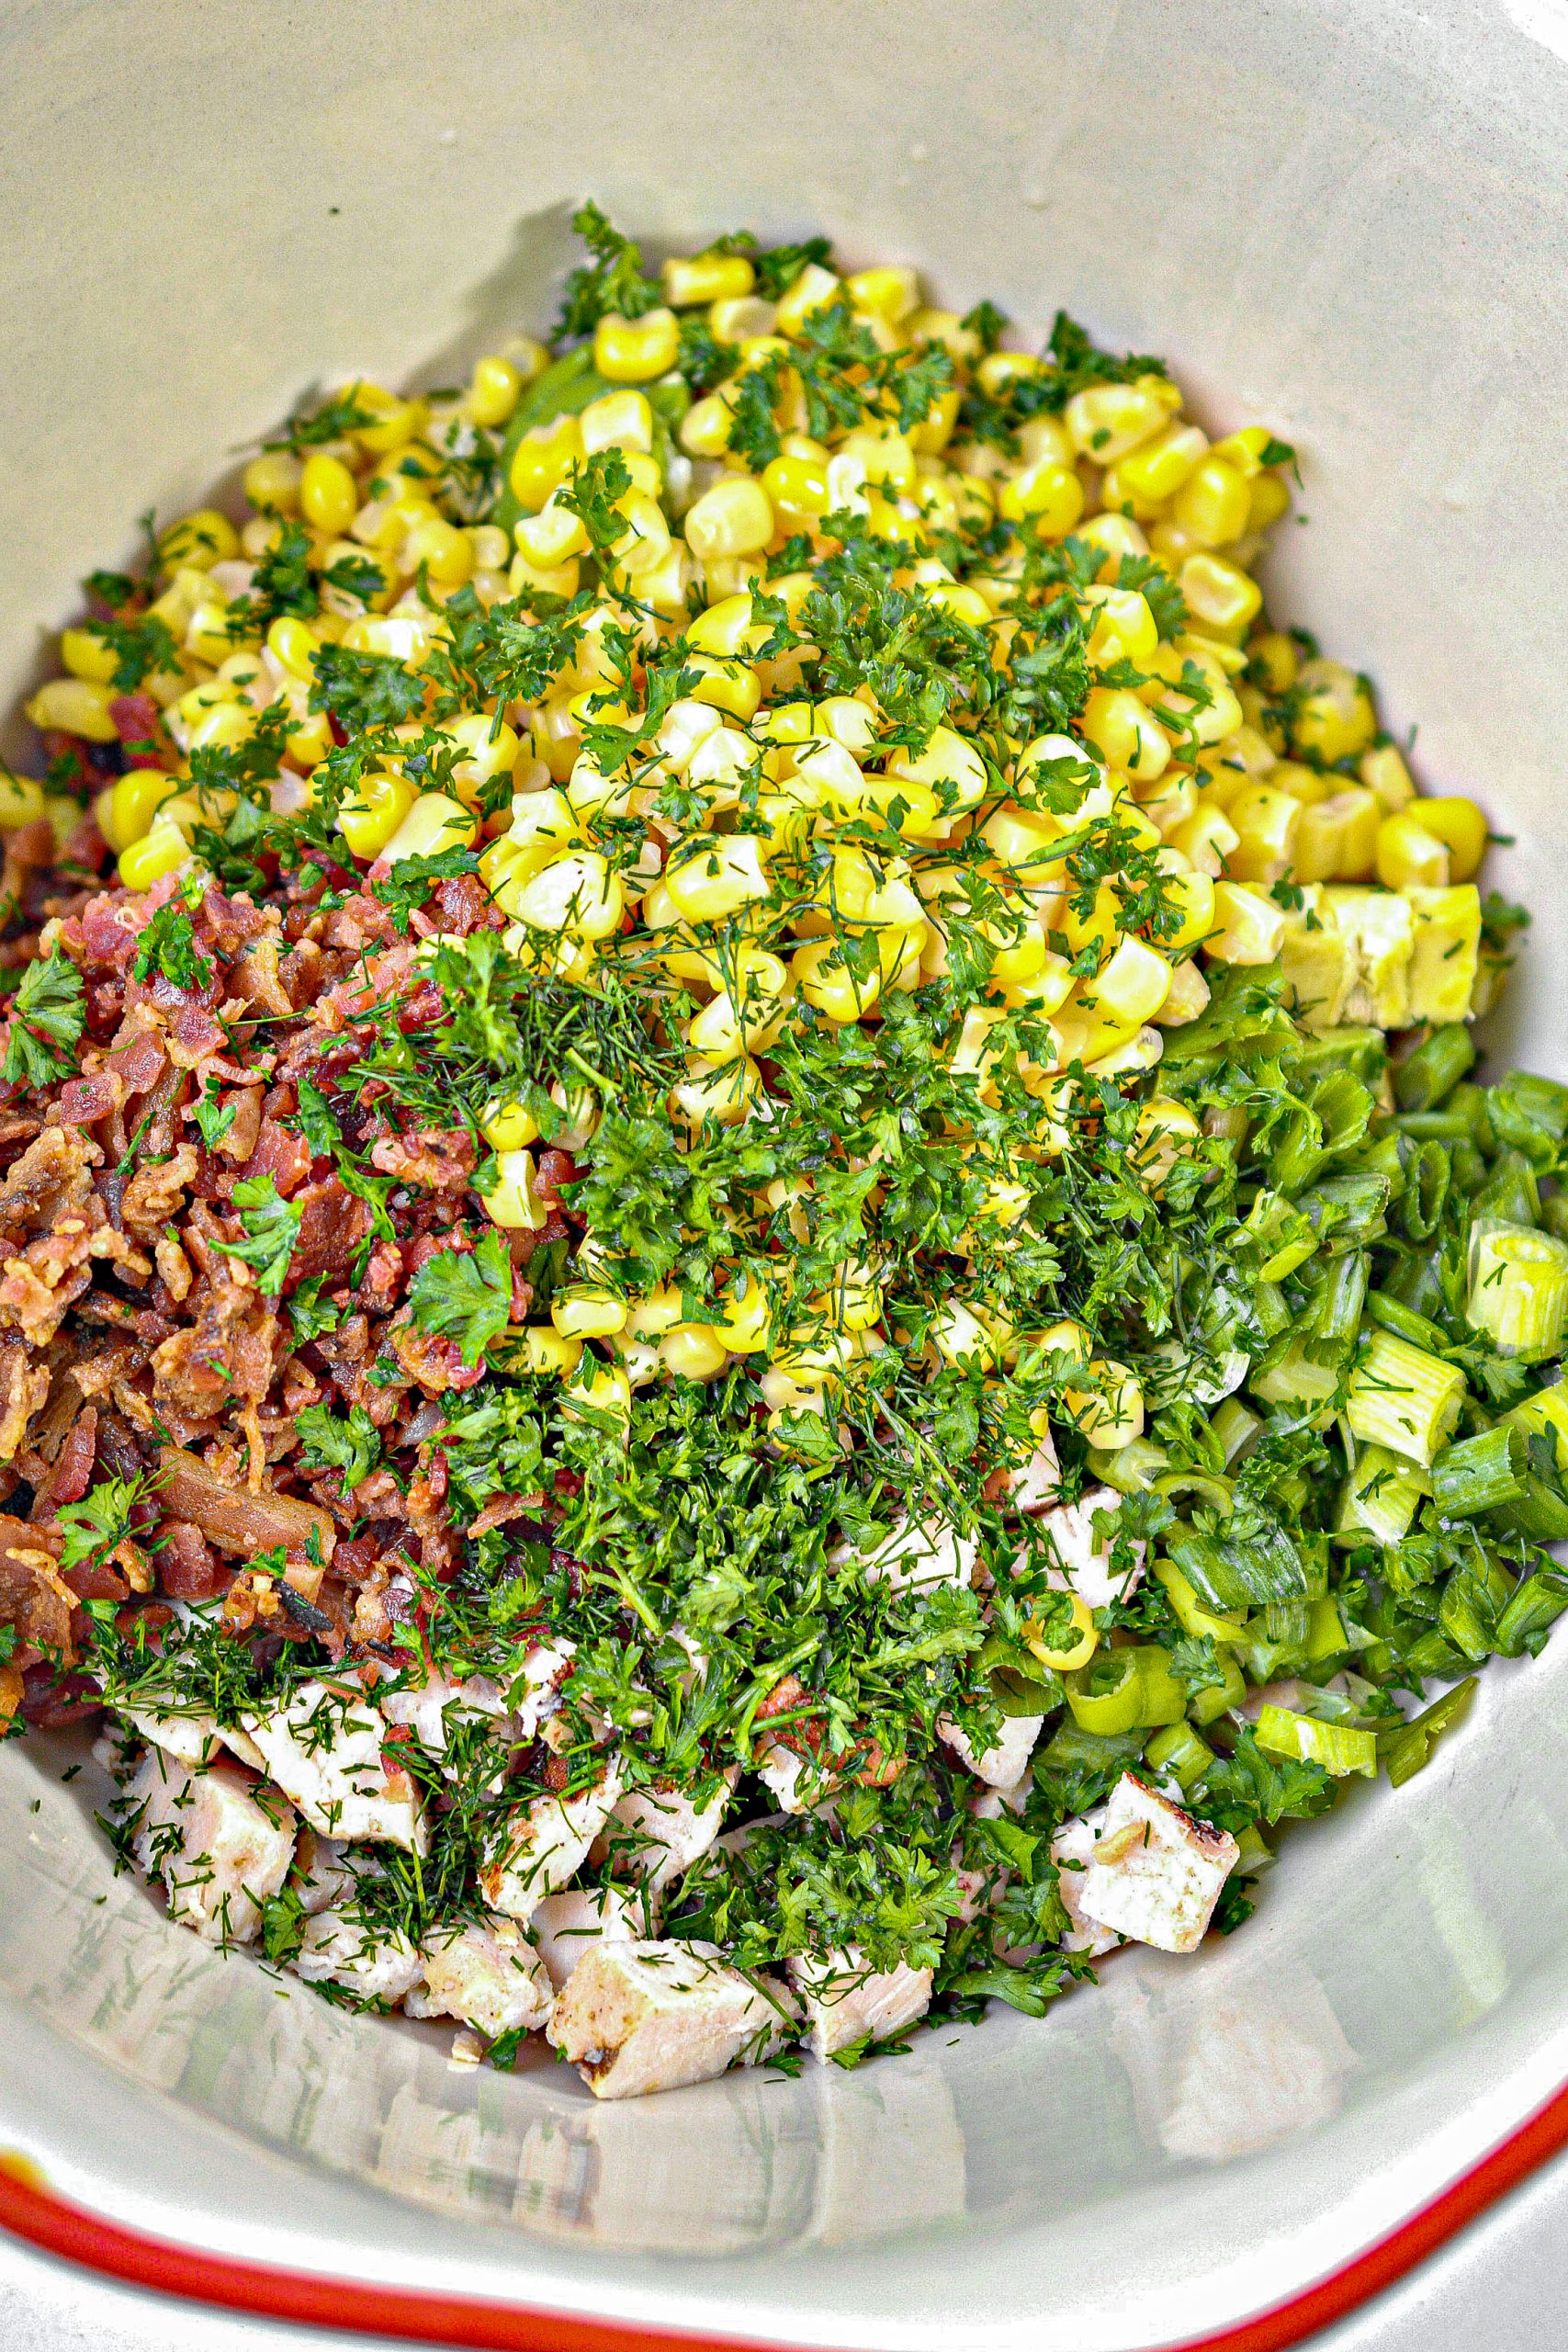 In a large mixing bowl, combine the chicken, chopped avocado, corn, green onion, bacon crumbles, dill and parsley.